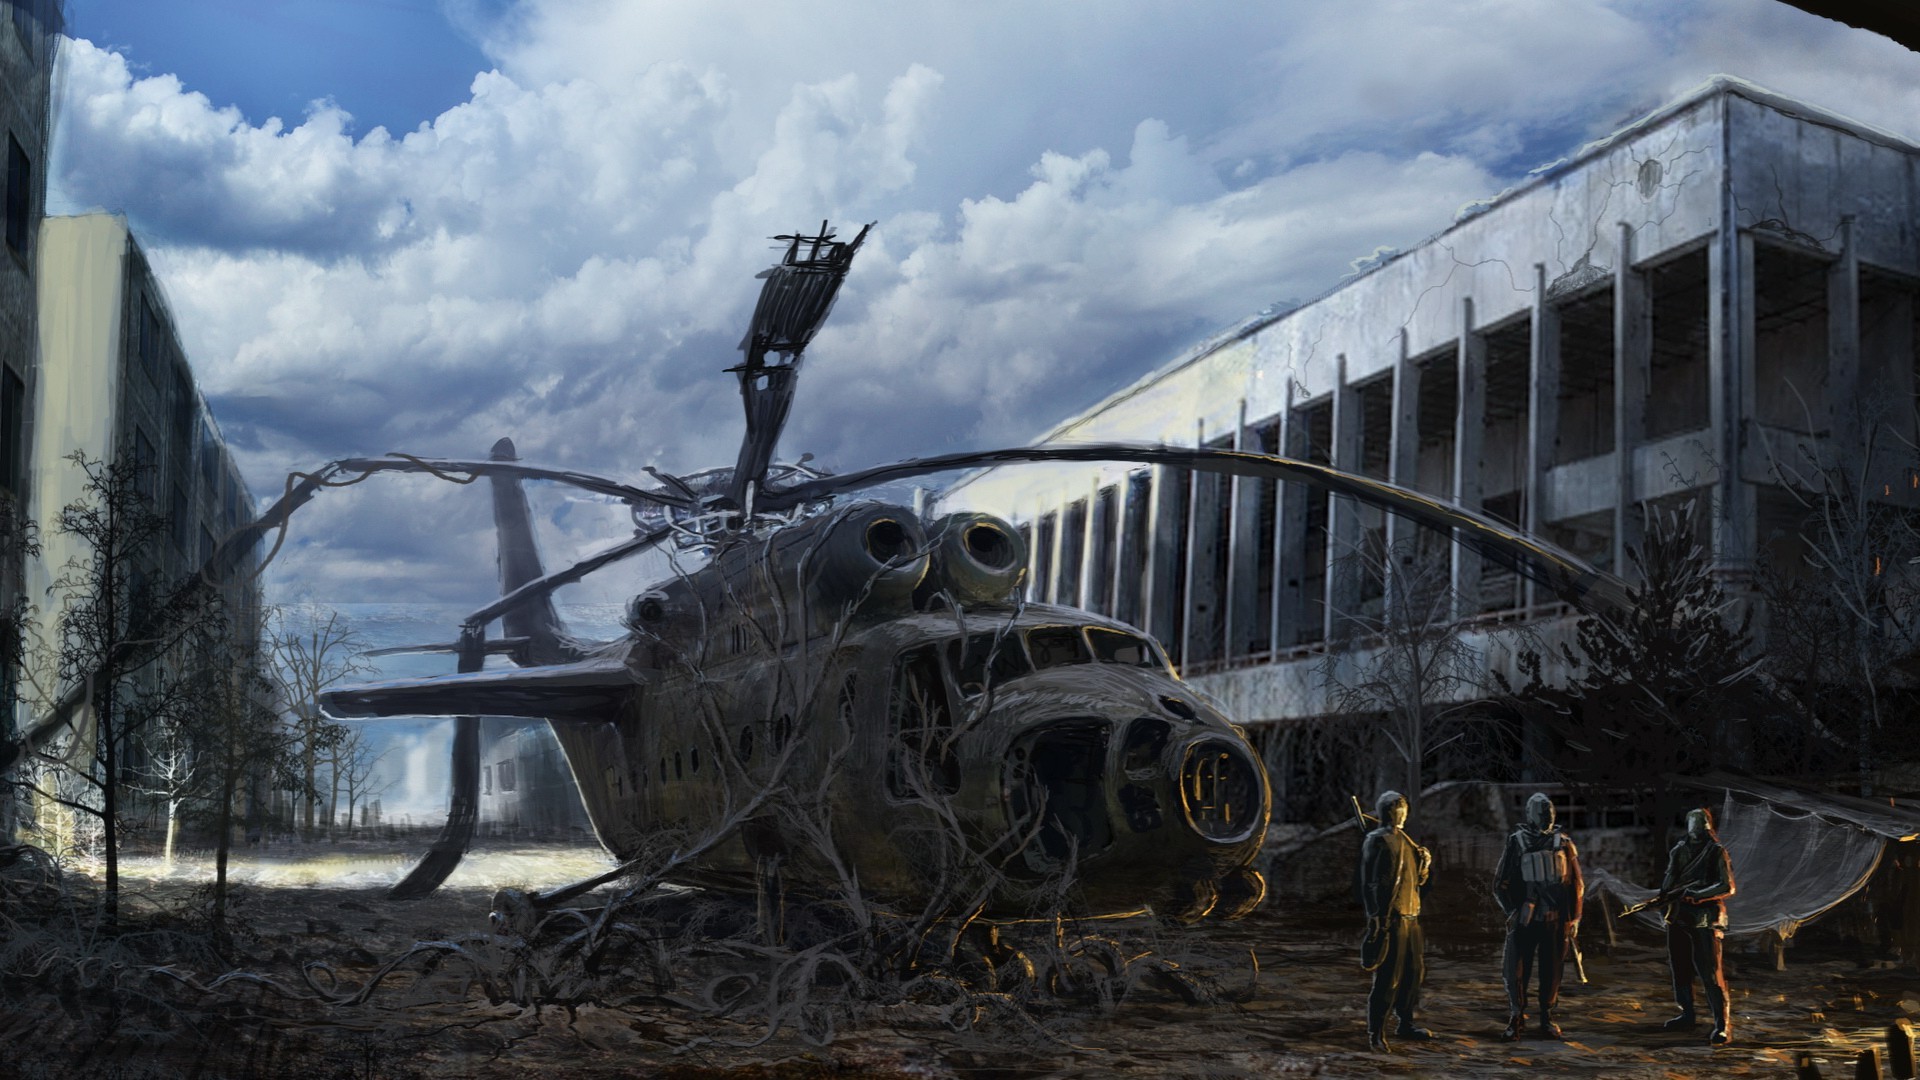 digital Art, Fantasy Art, Drawing, Men, Soldier, Helicopters, Ruin, Building, Clouds, Roots, Trees Wallpaper